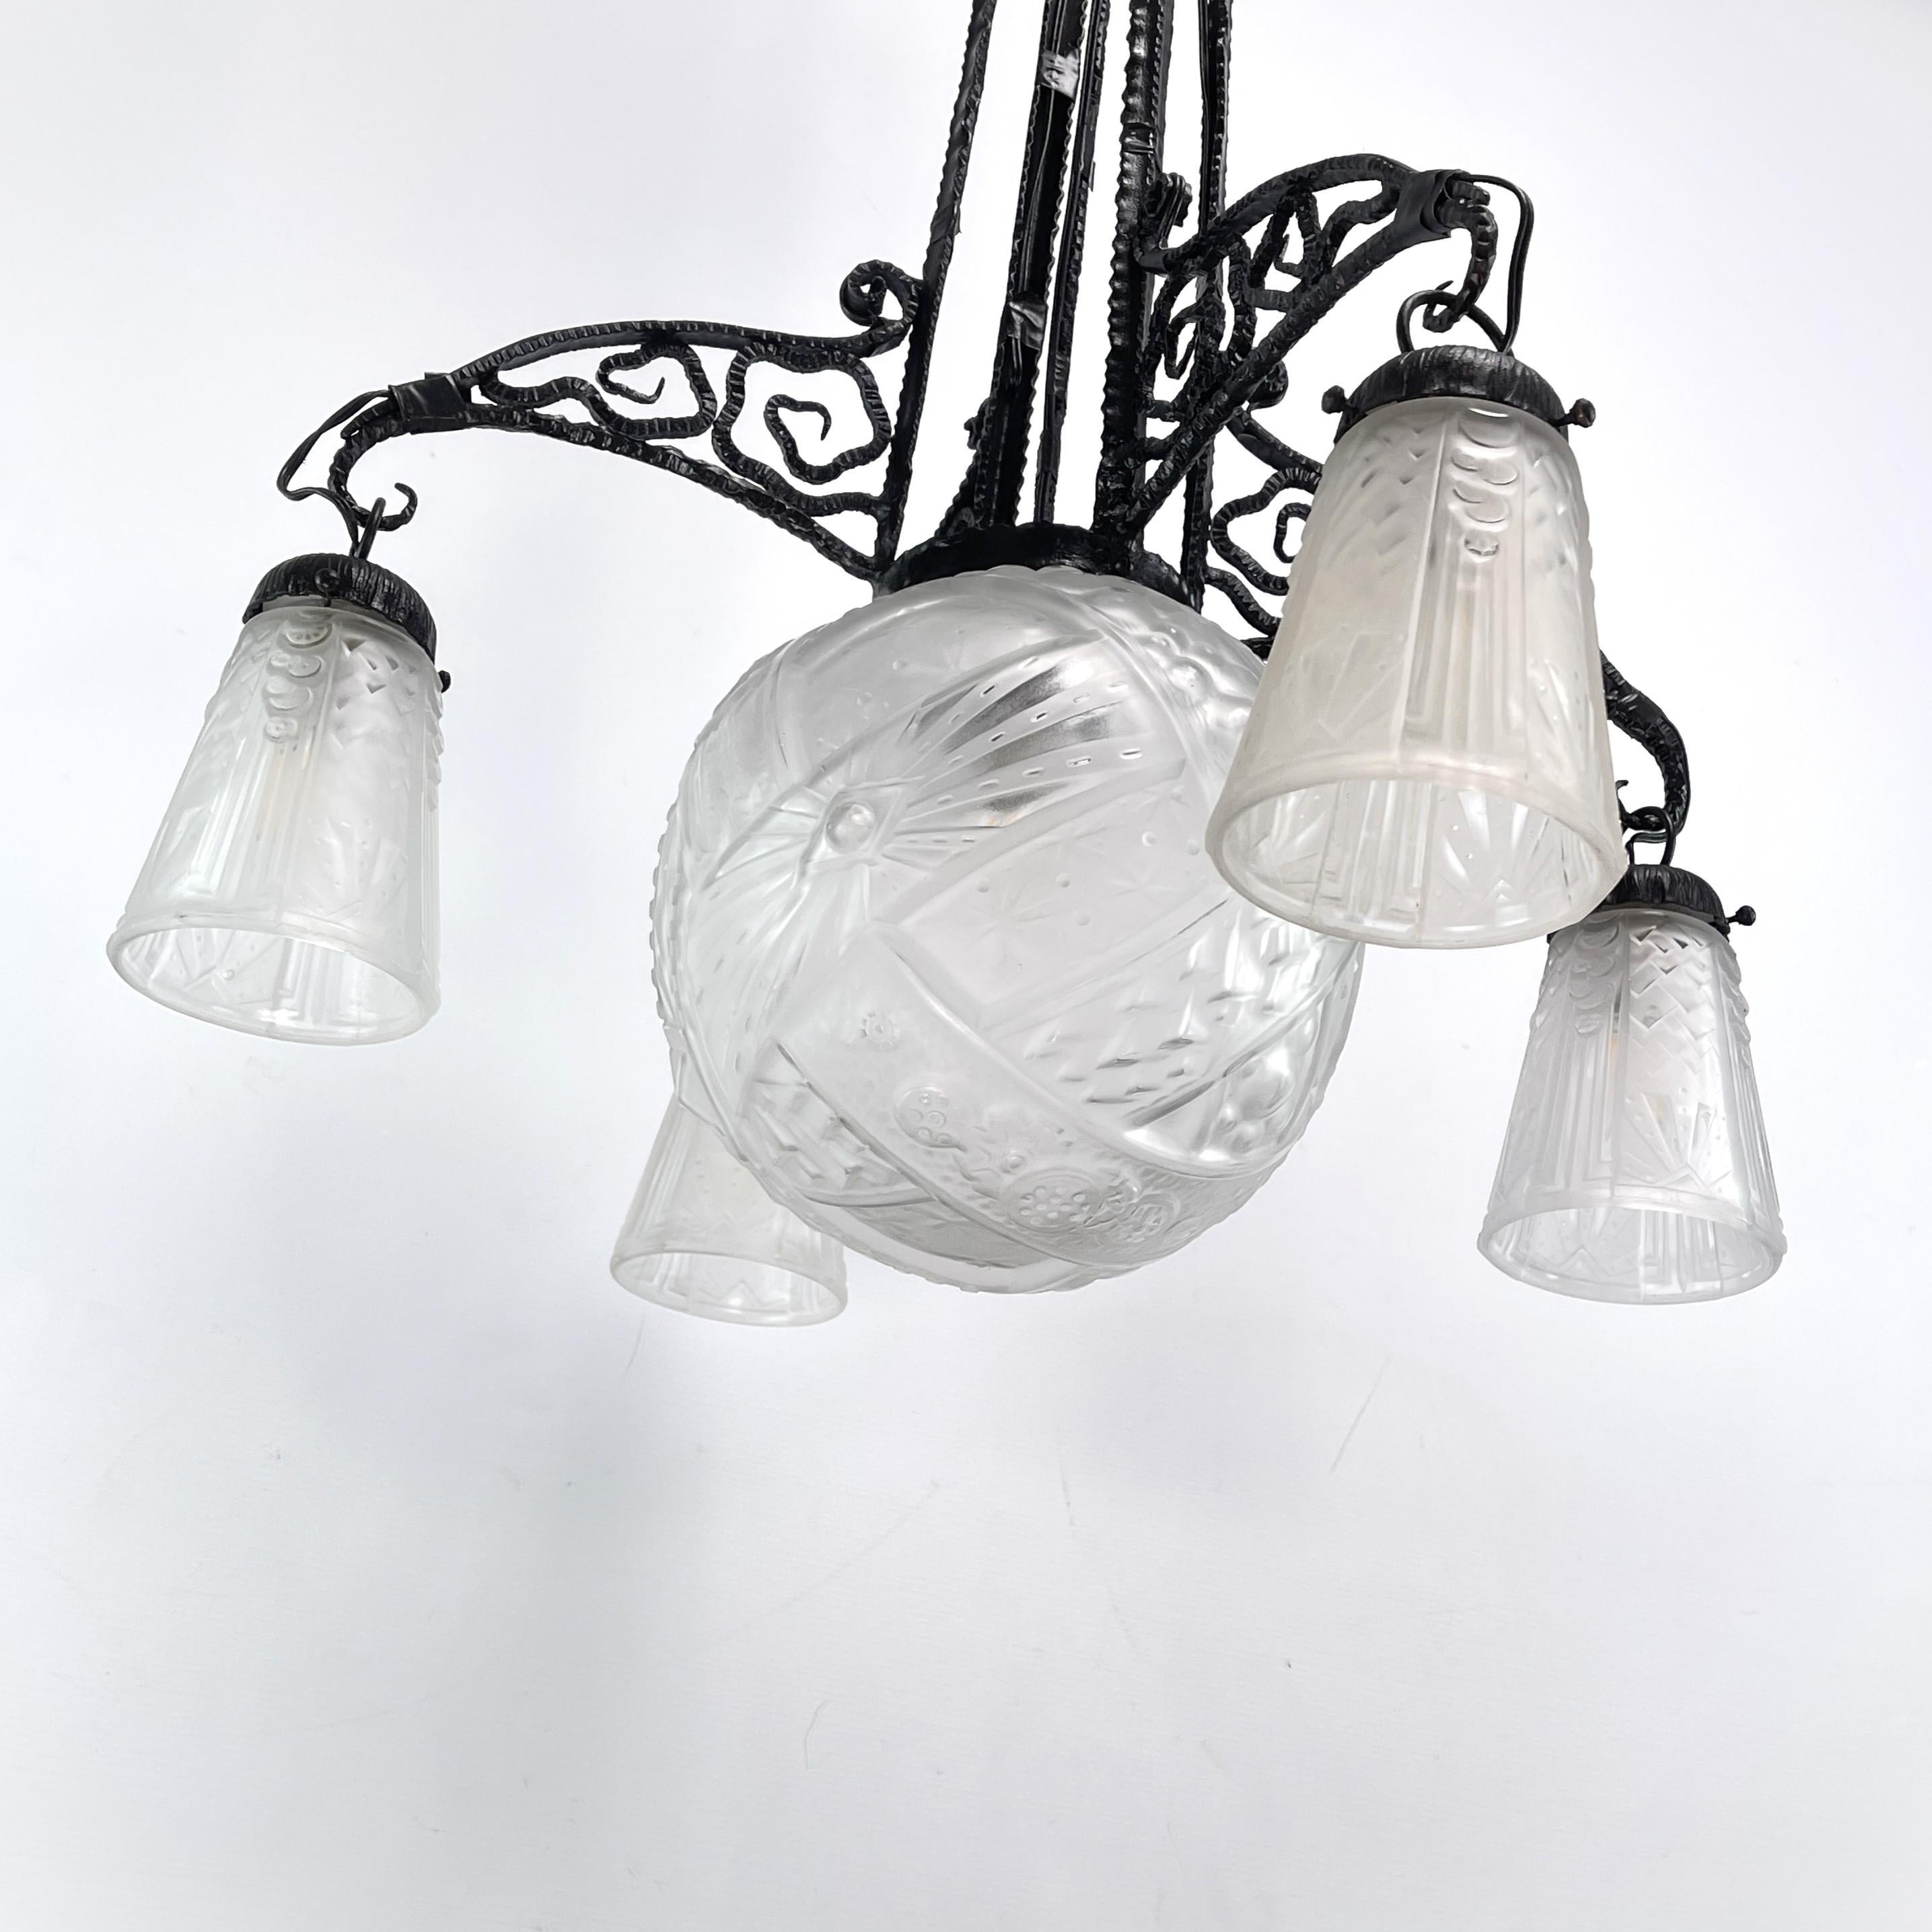 French Art Deco wrought iron Ceiling Lamp by Muller Freres, Luneville, 1930s For Sale